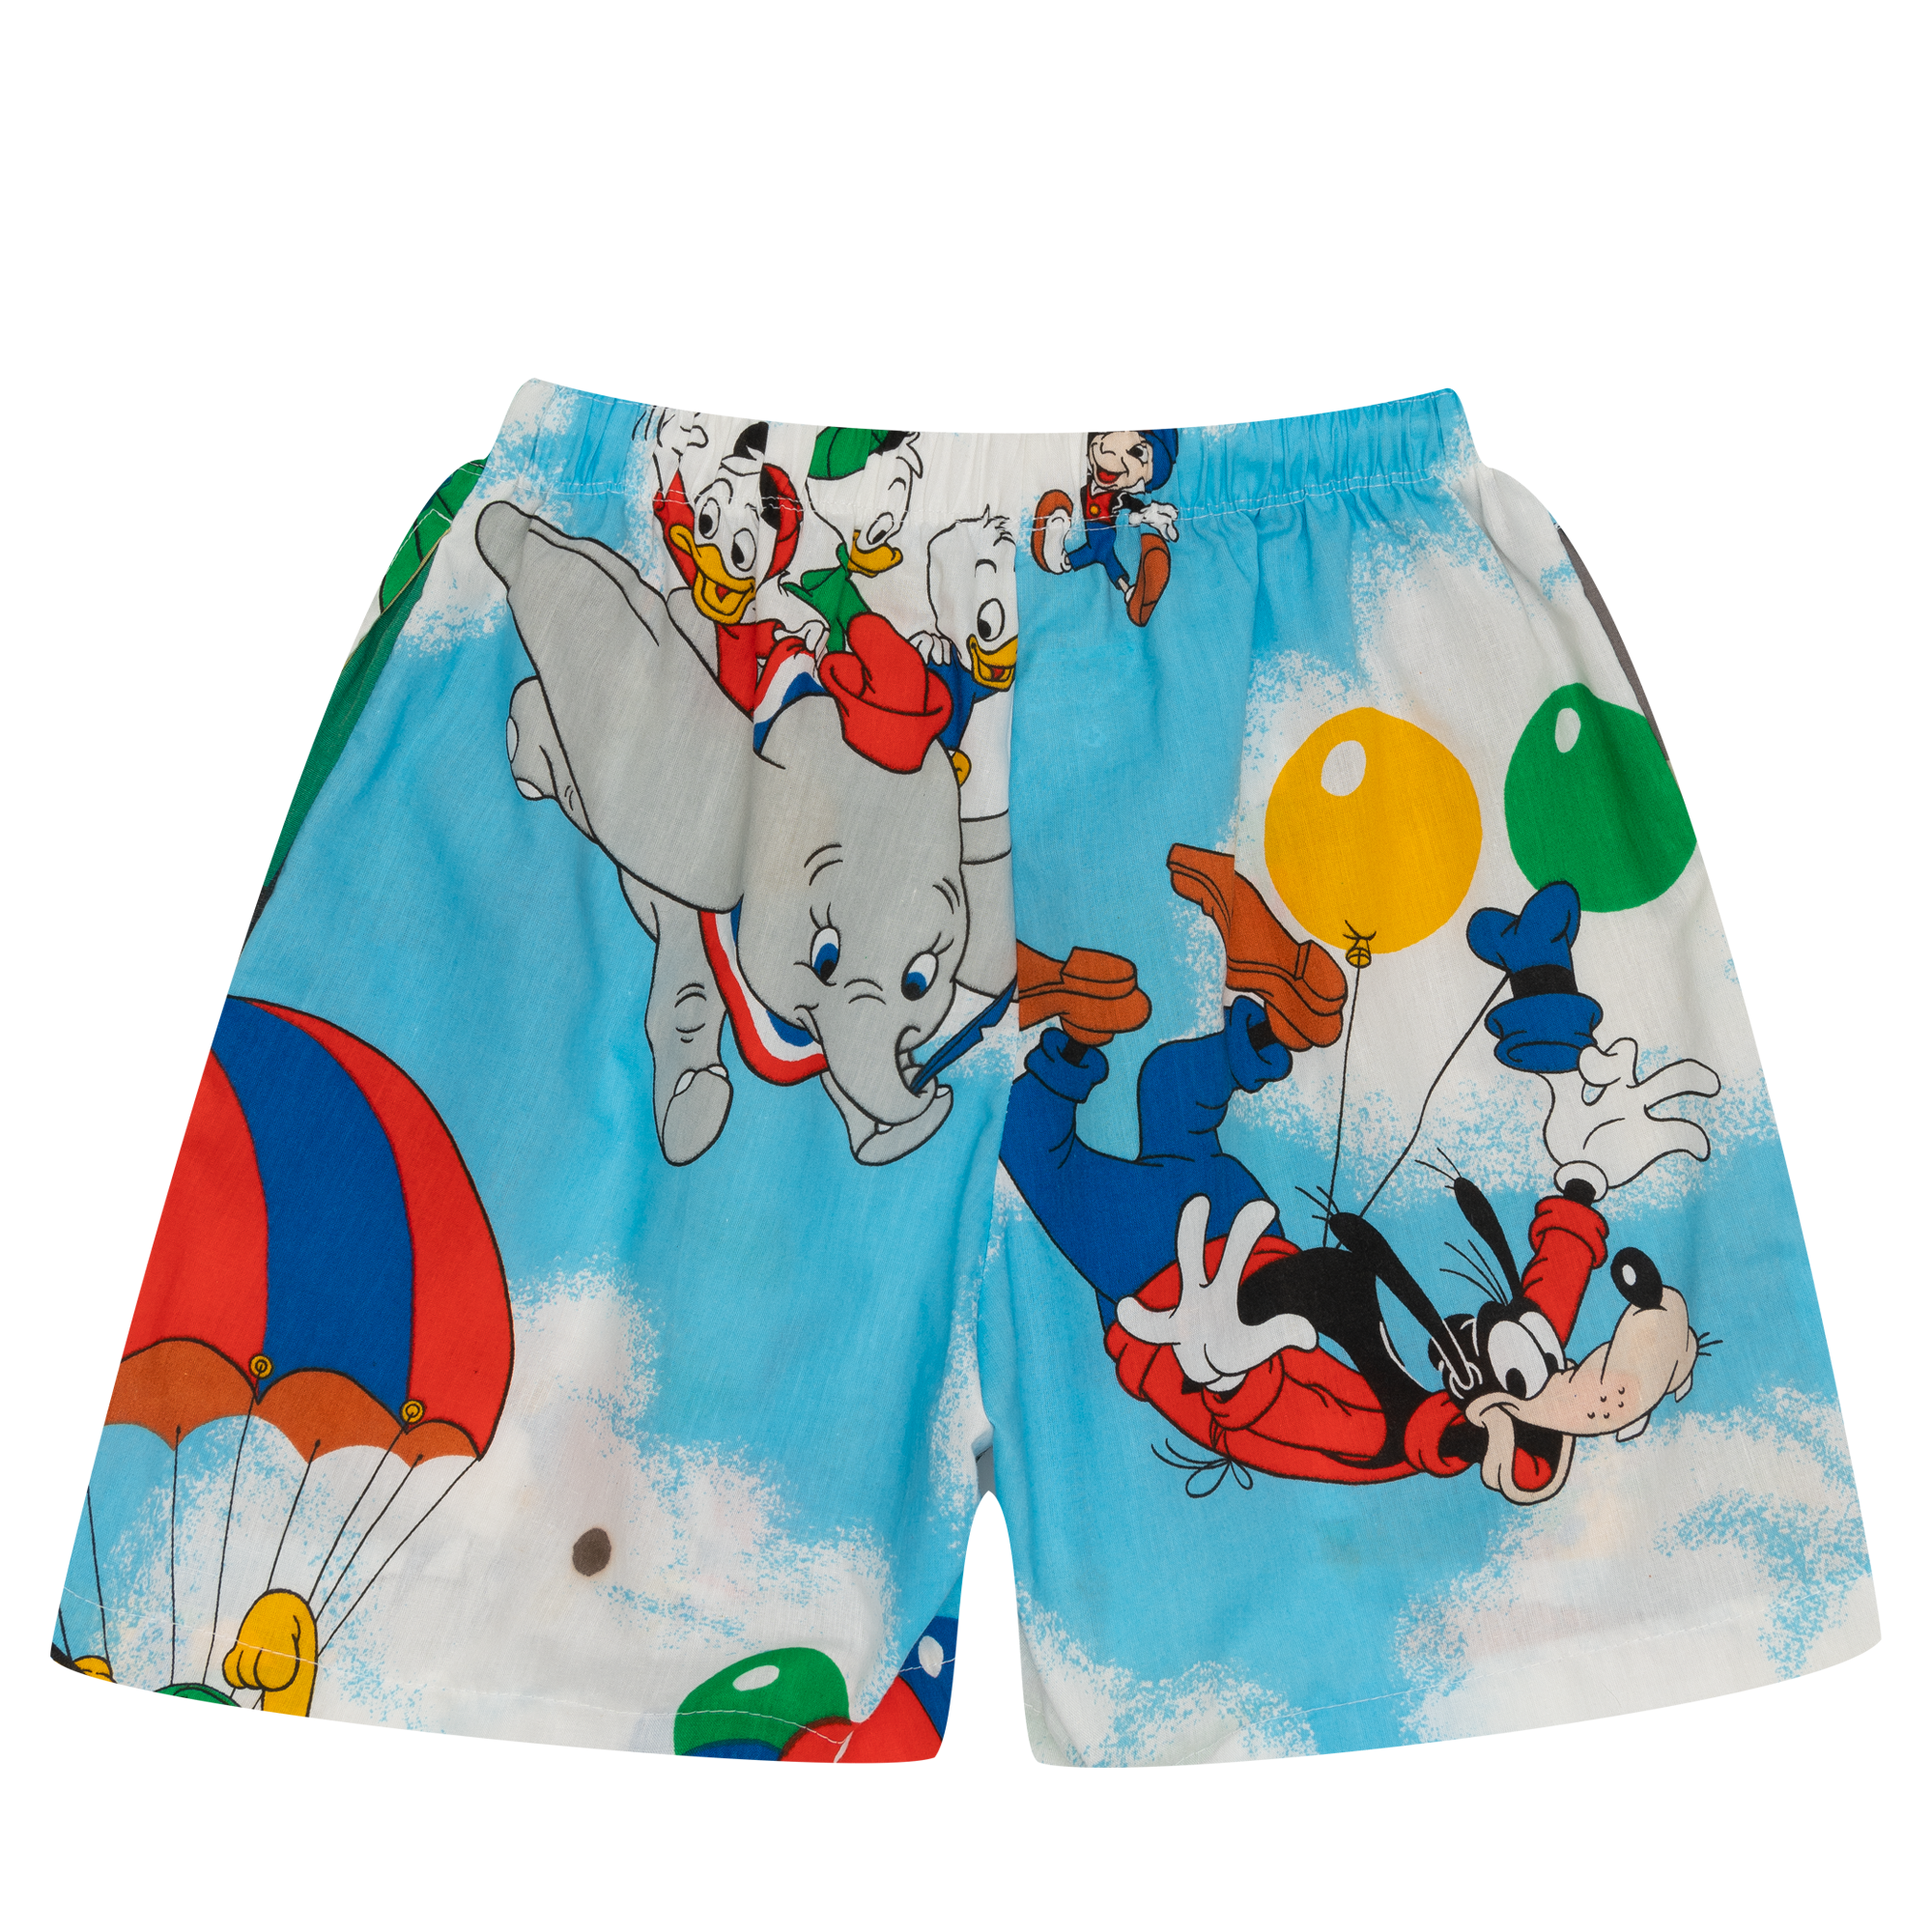 Plus Reworked Mickey Air Mobile Shorts Blue-PLUS